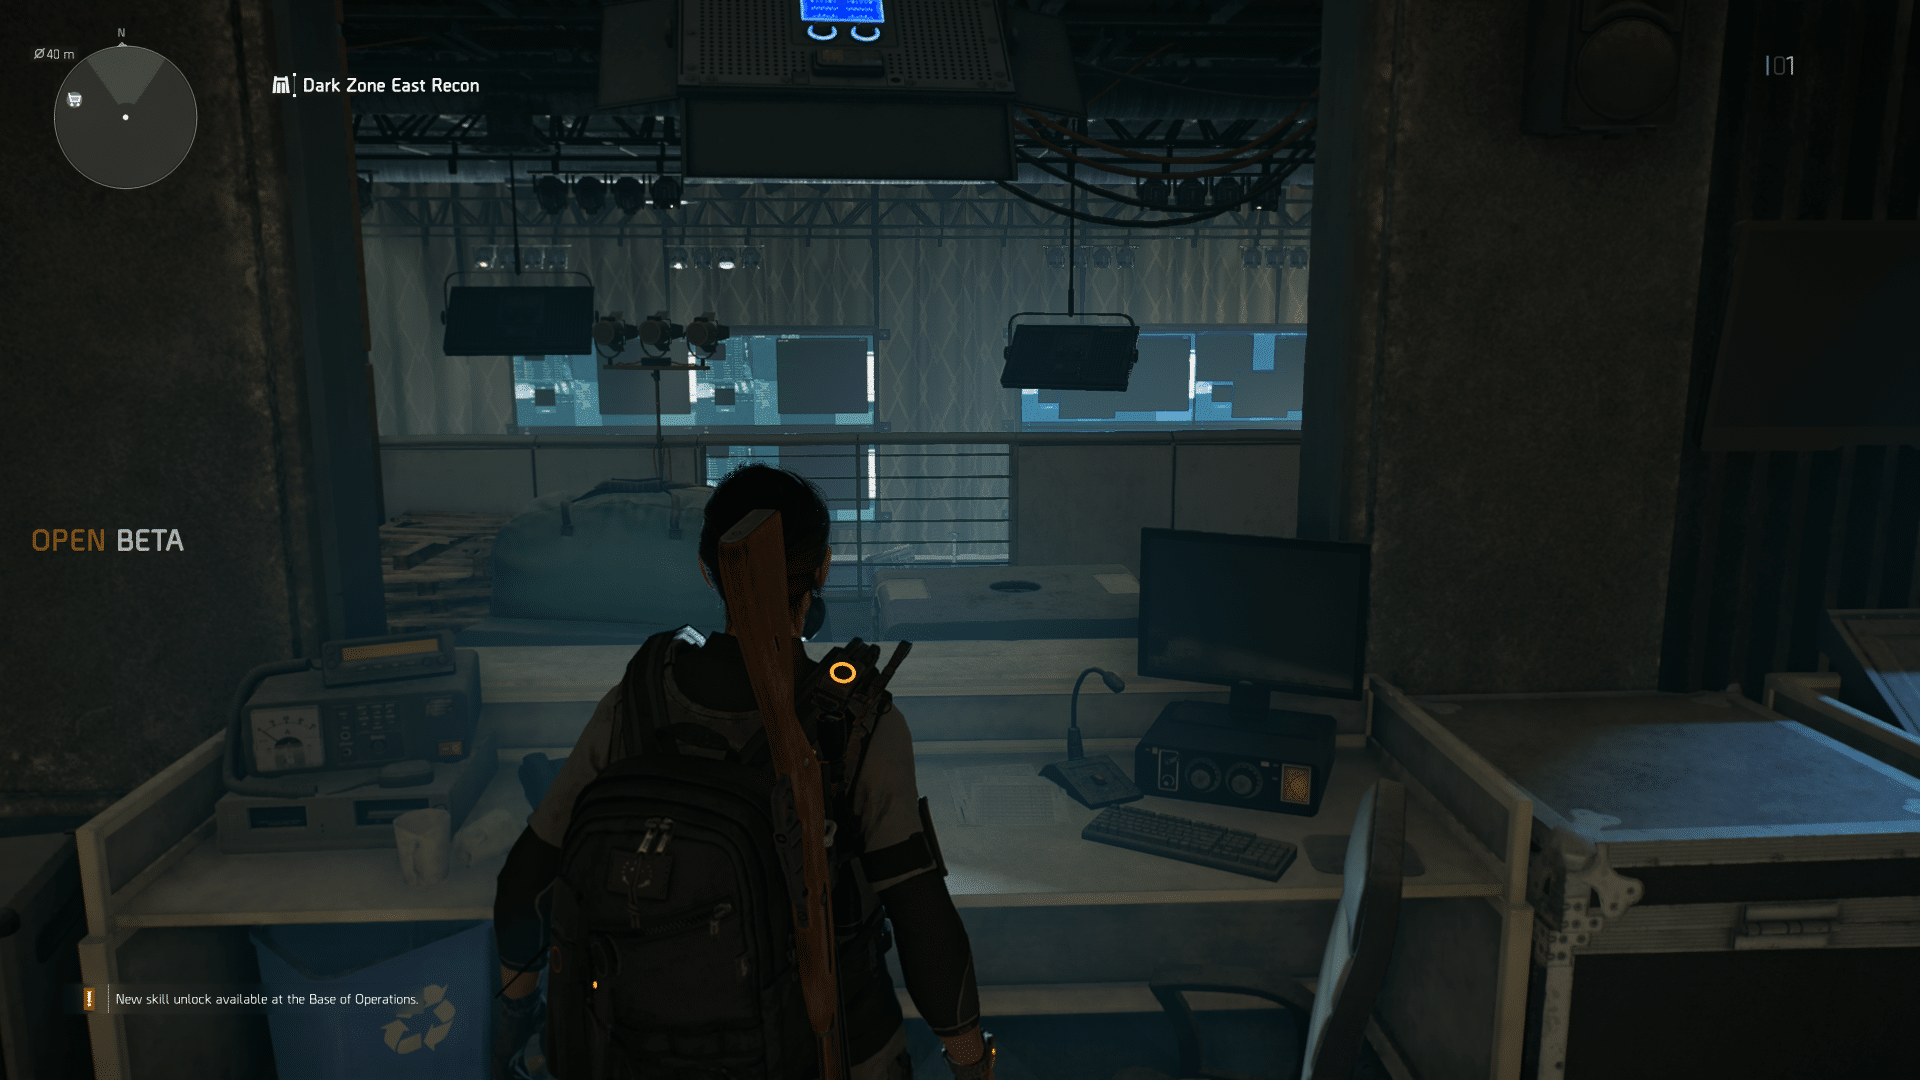 TheDivision2 3 4 2019 8 53 39 PM 814